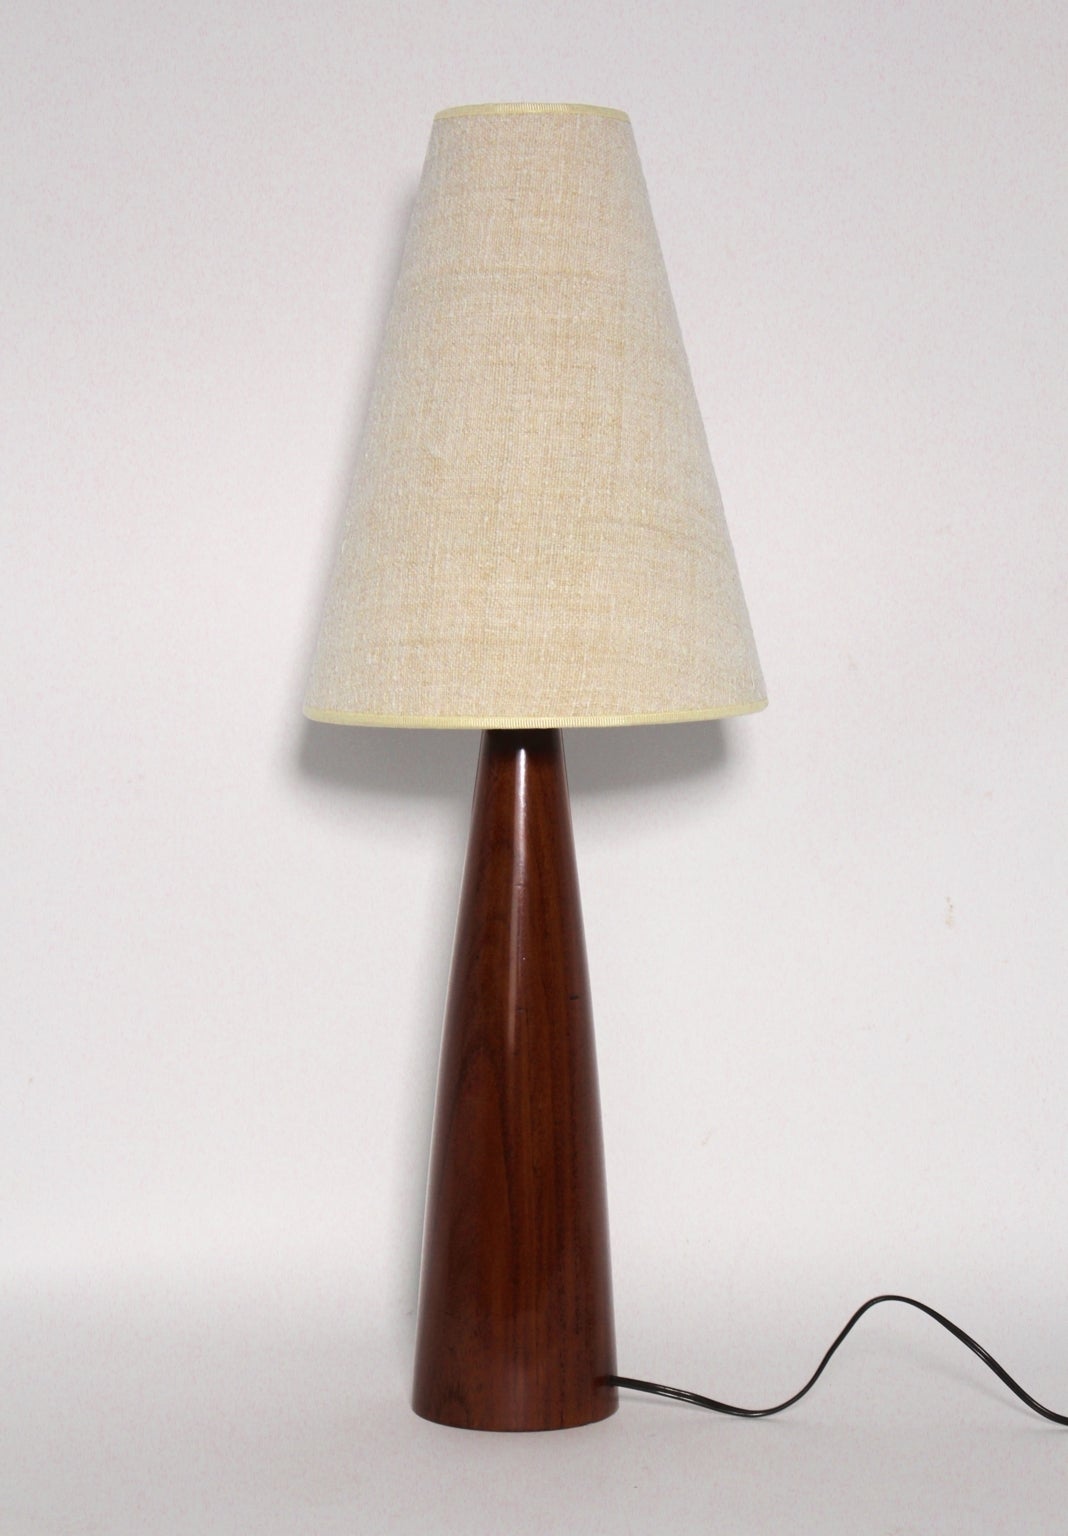 Scandinavian modern Cone shape teak table lamp designed and produced in Denmark, circa 1960.

Wonderful rich teak grain,shellac hand polished.
The recovered lamp shade shows natural linen. 

The height is including the shade. One socket E 14, on/off